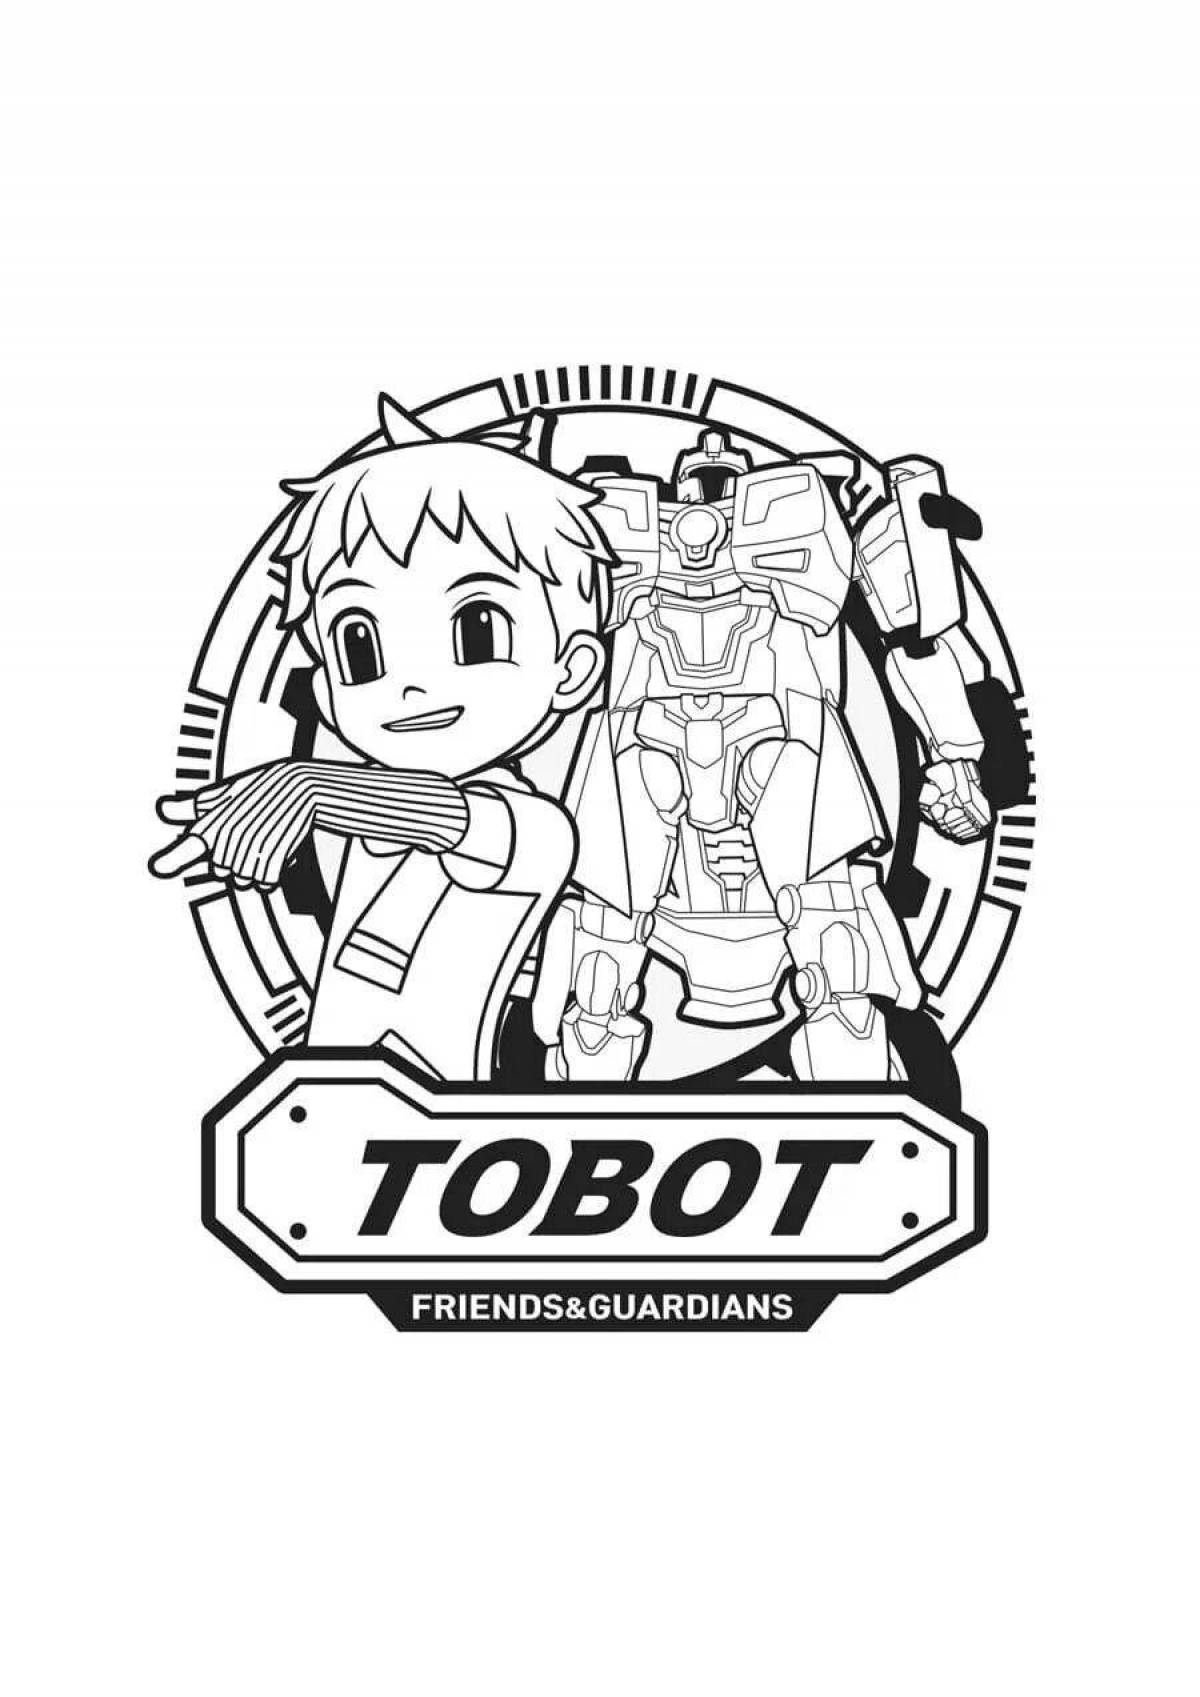 Colorful tobot t coloring book